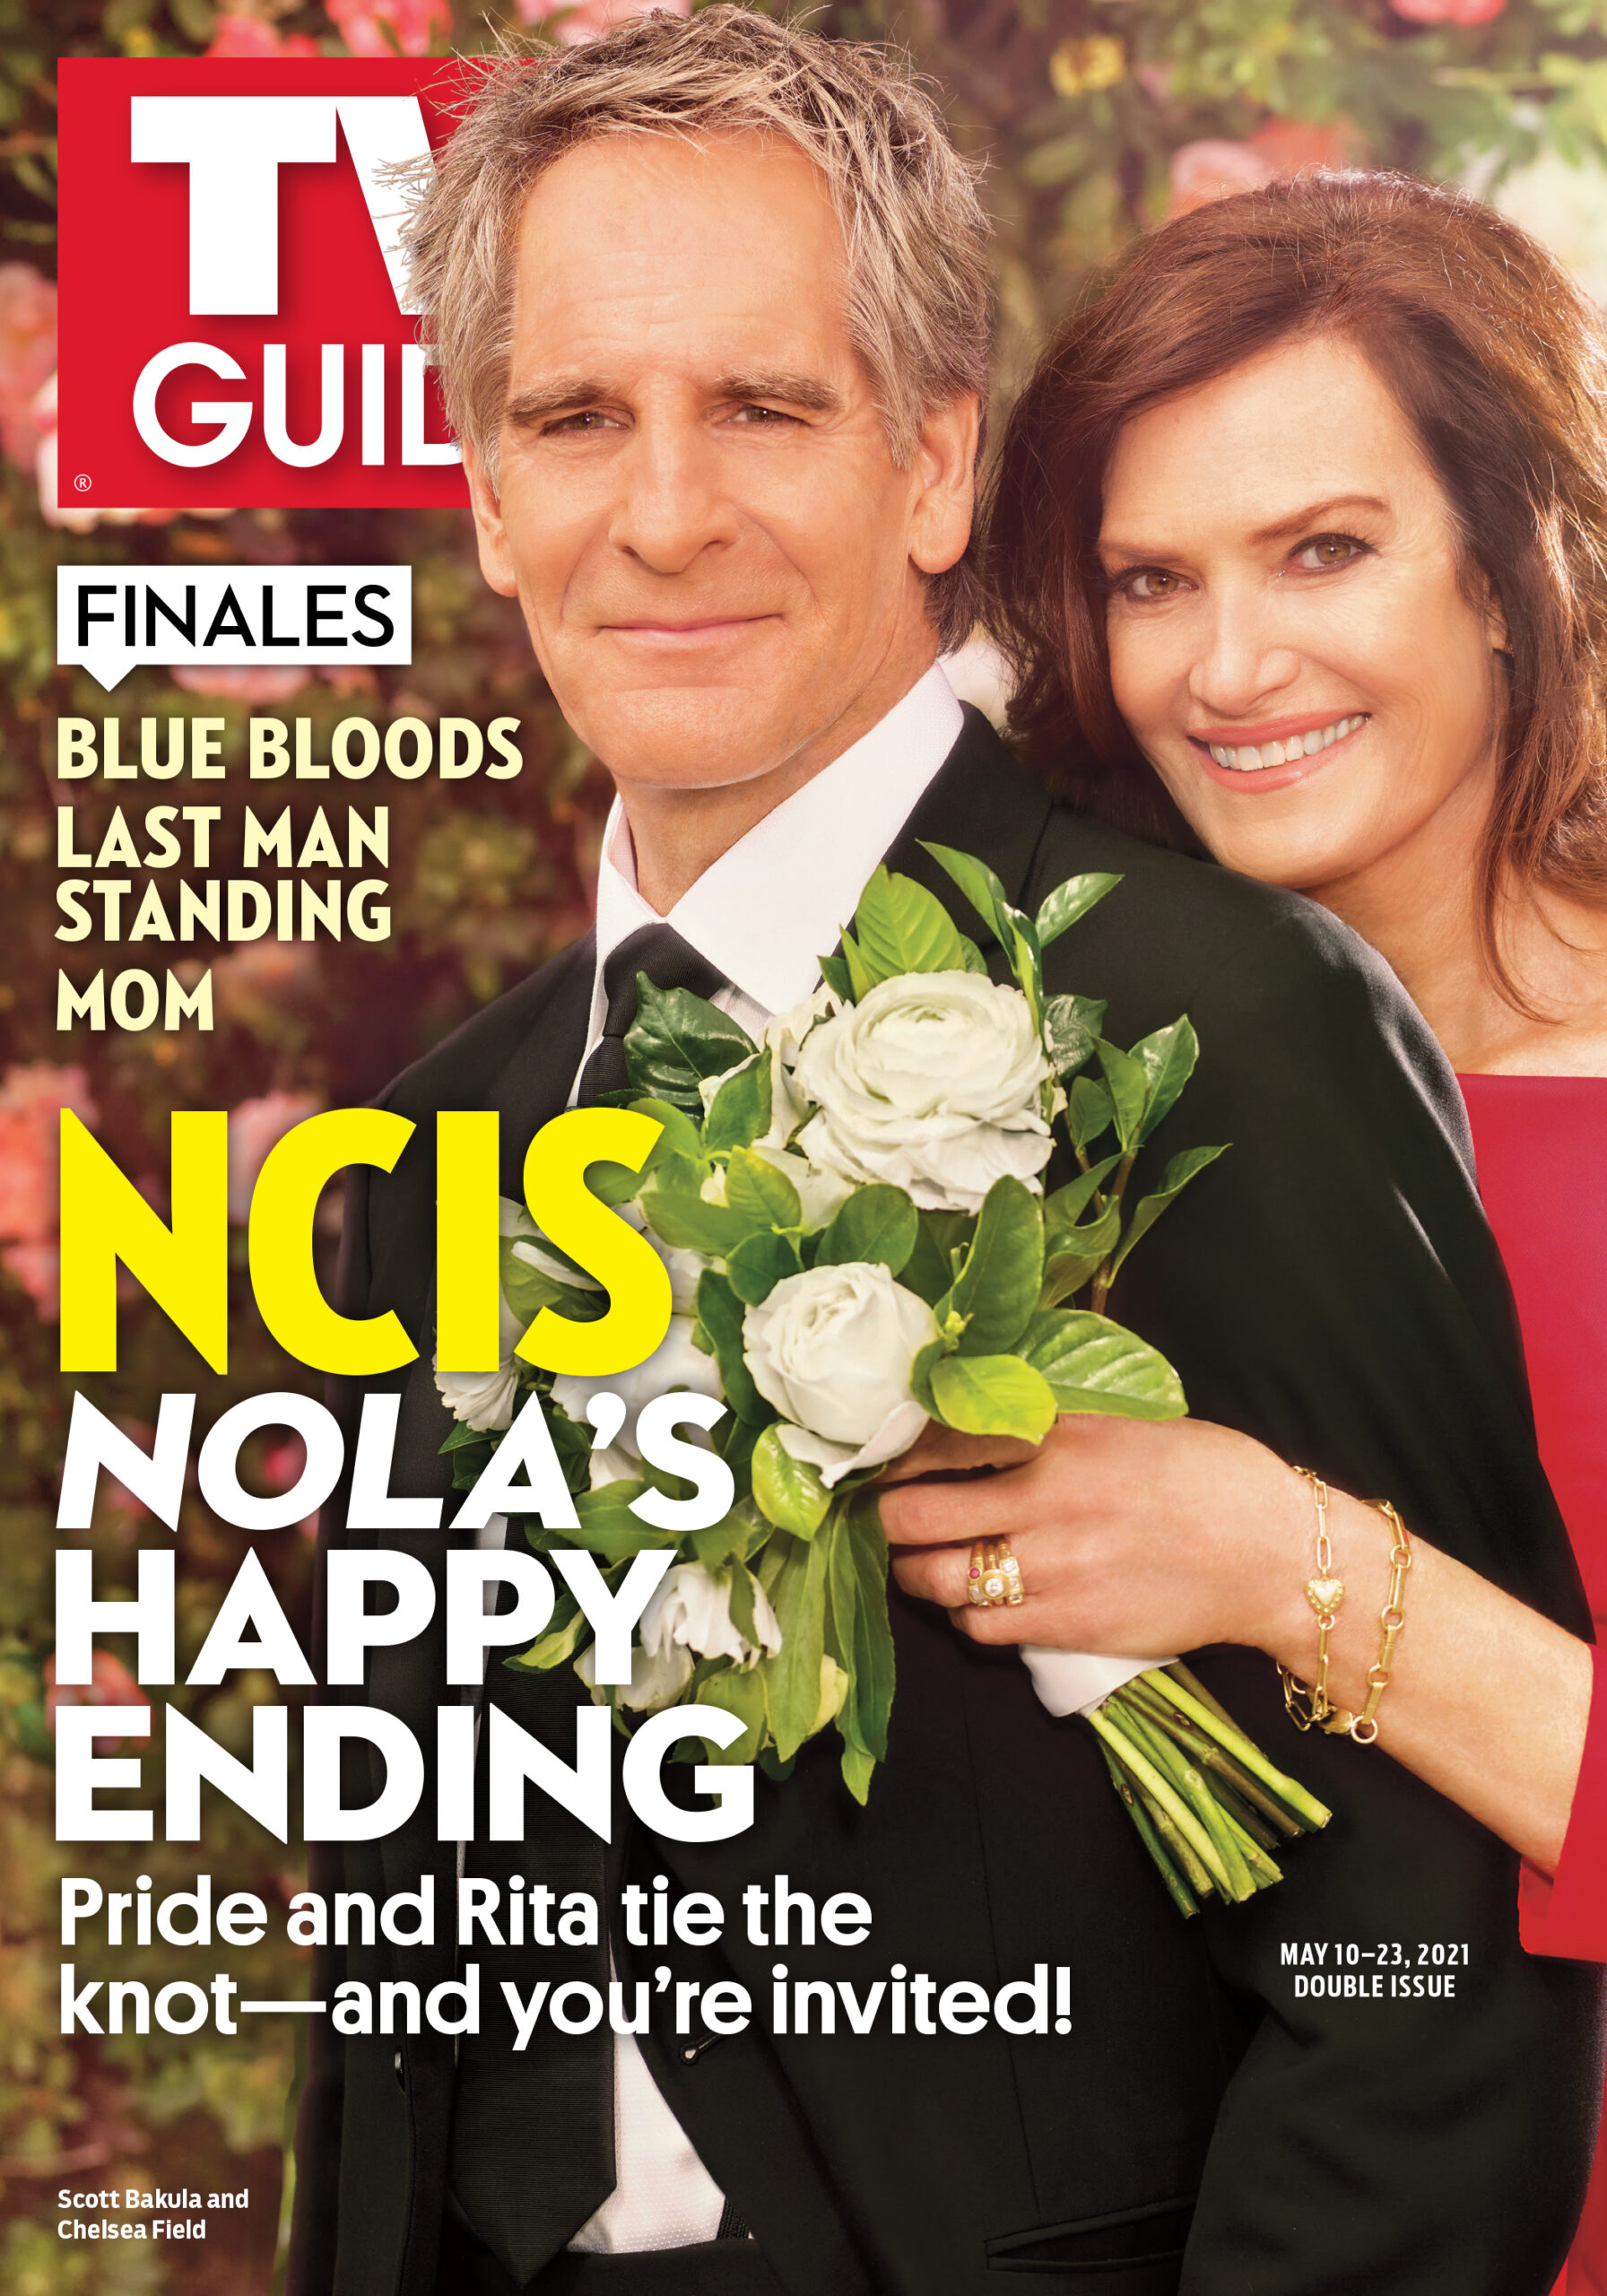 TV Guide - Cover NCIS NOLA's Happy Ending - May 10, 2021